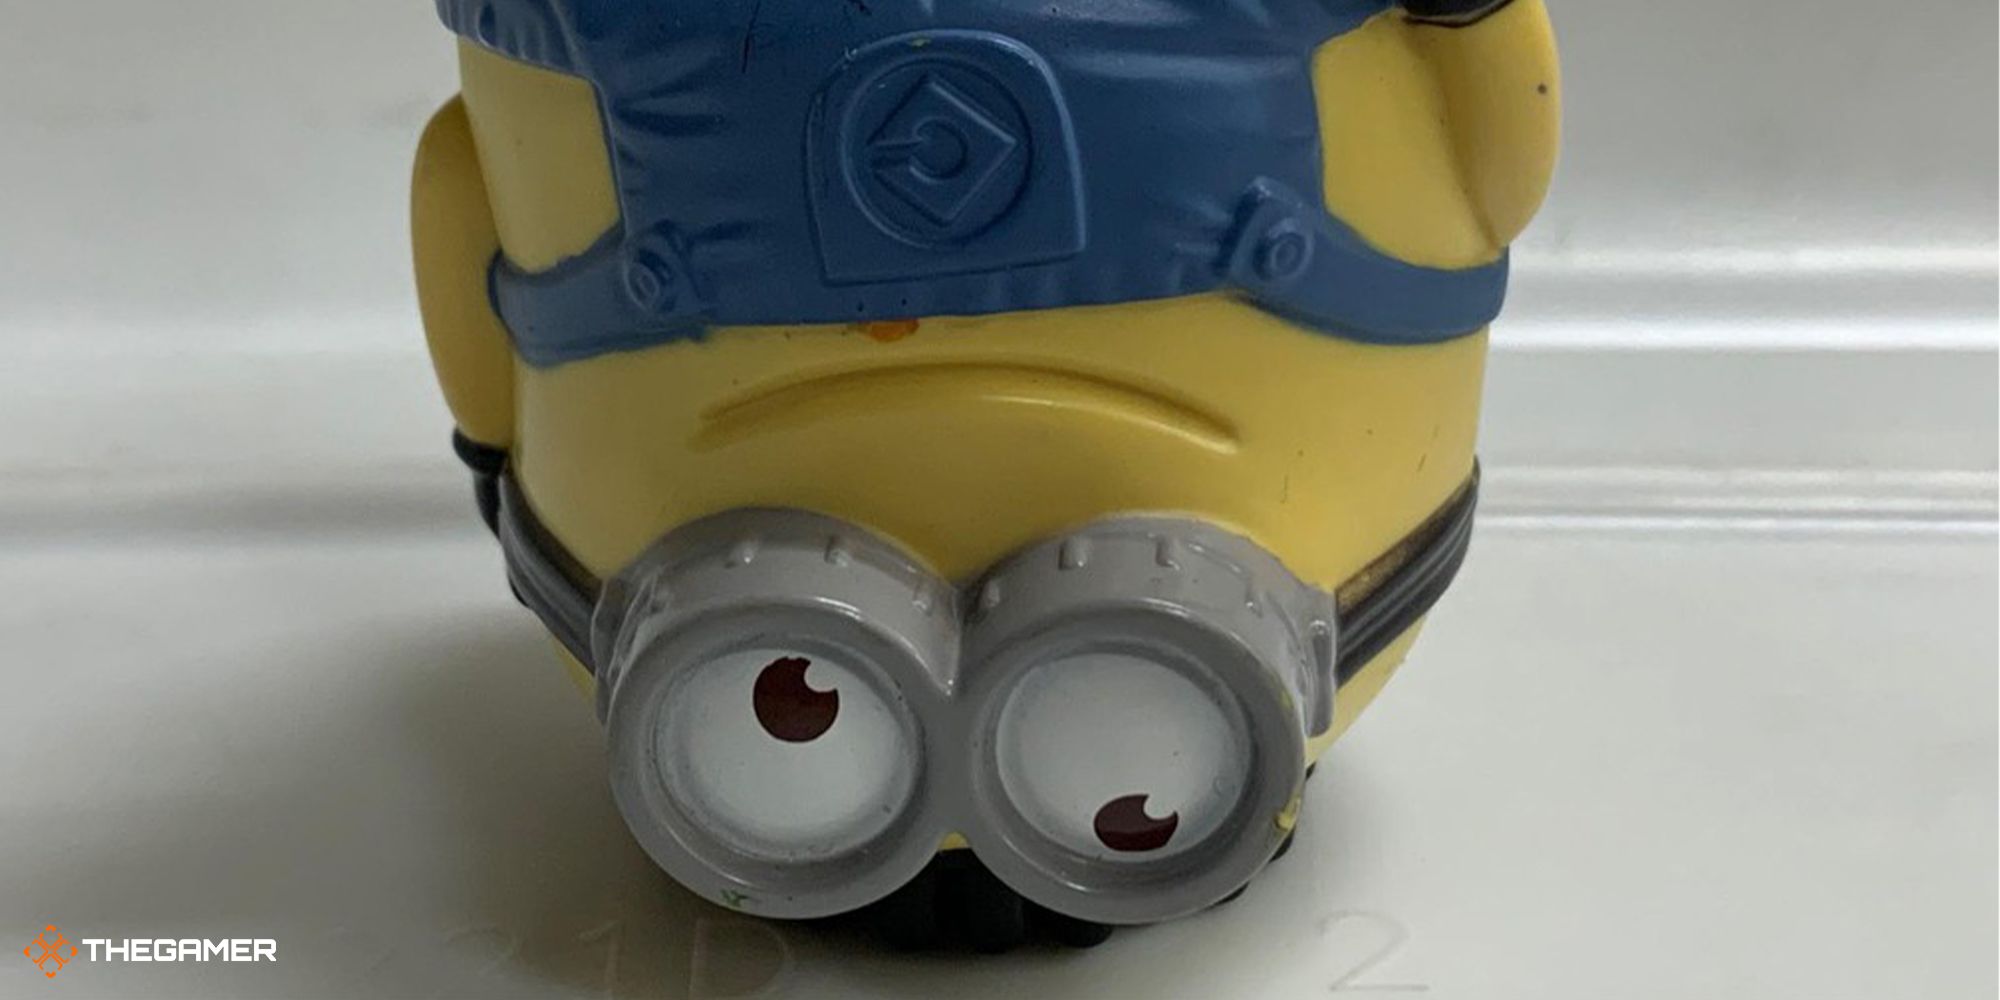 Jerry the minion break dancing - Happy Meal Toy, McDonalds